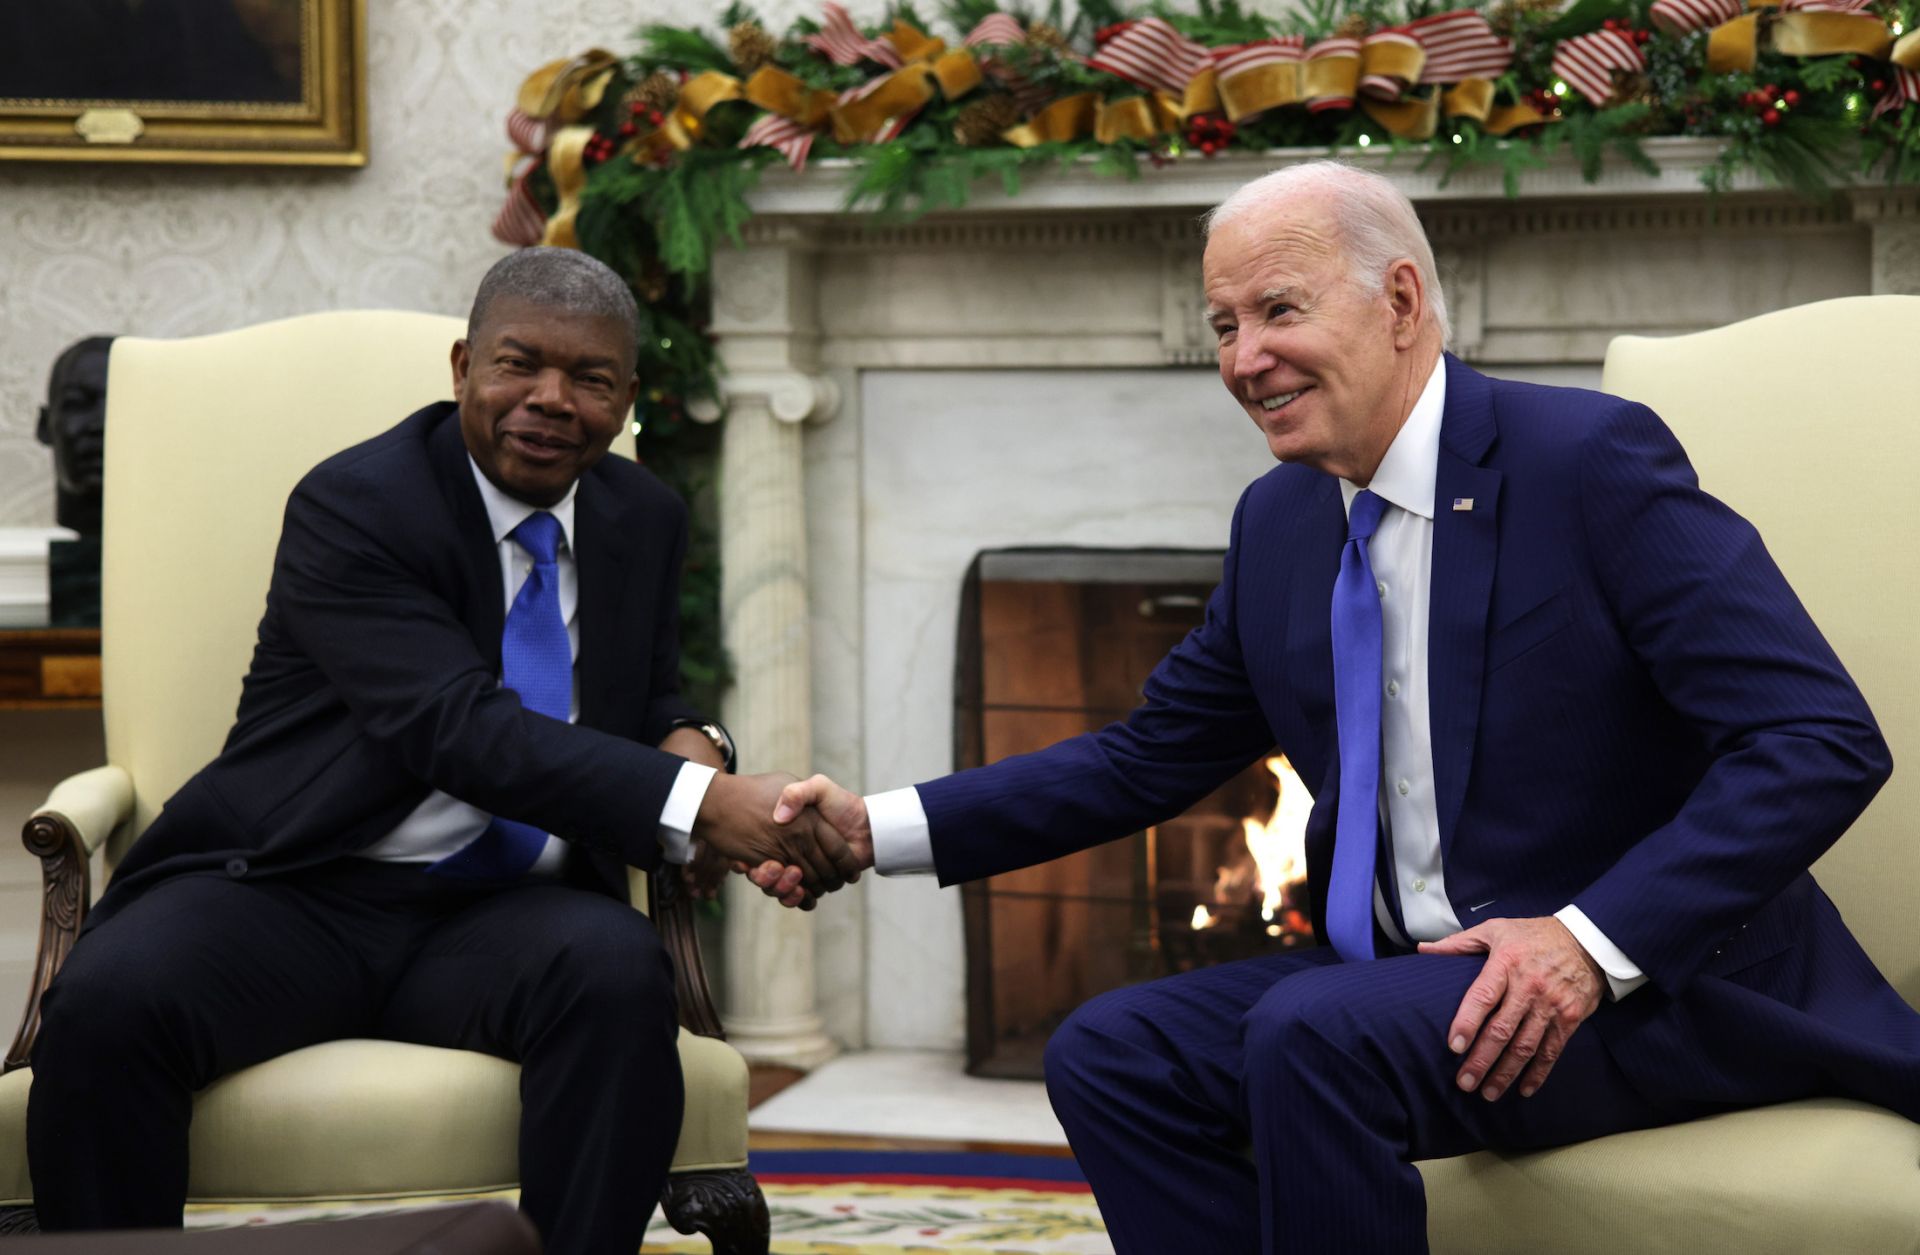 U.S. President Joe Biden shakes hands with President Joao Lourenco of Angola during a meeting in the Oval Office of the White House on Nov. 30, 2023, in Washington, D.C.